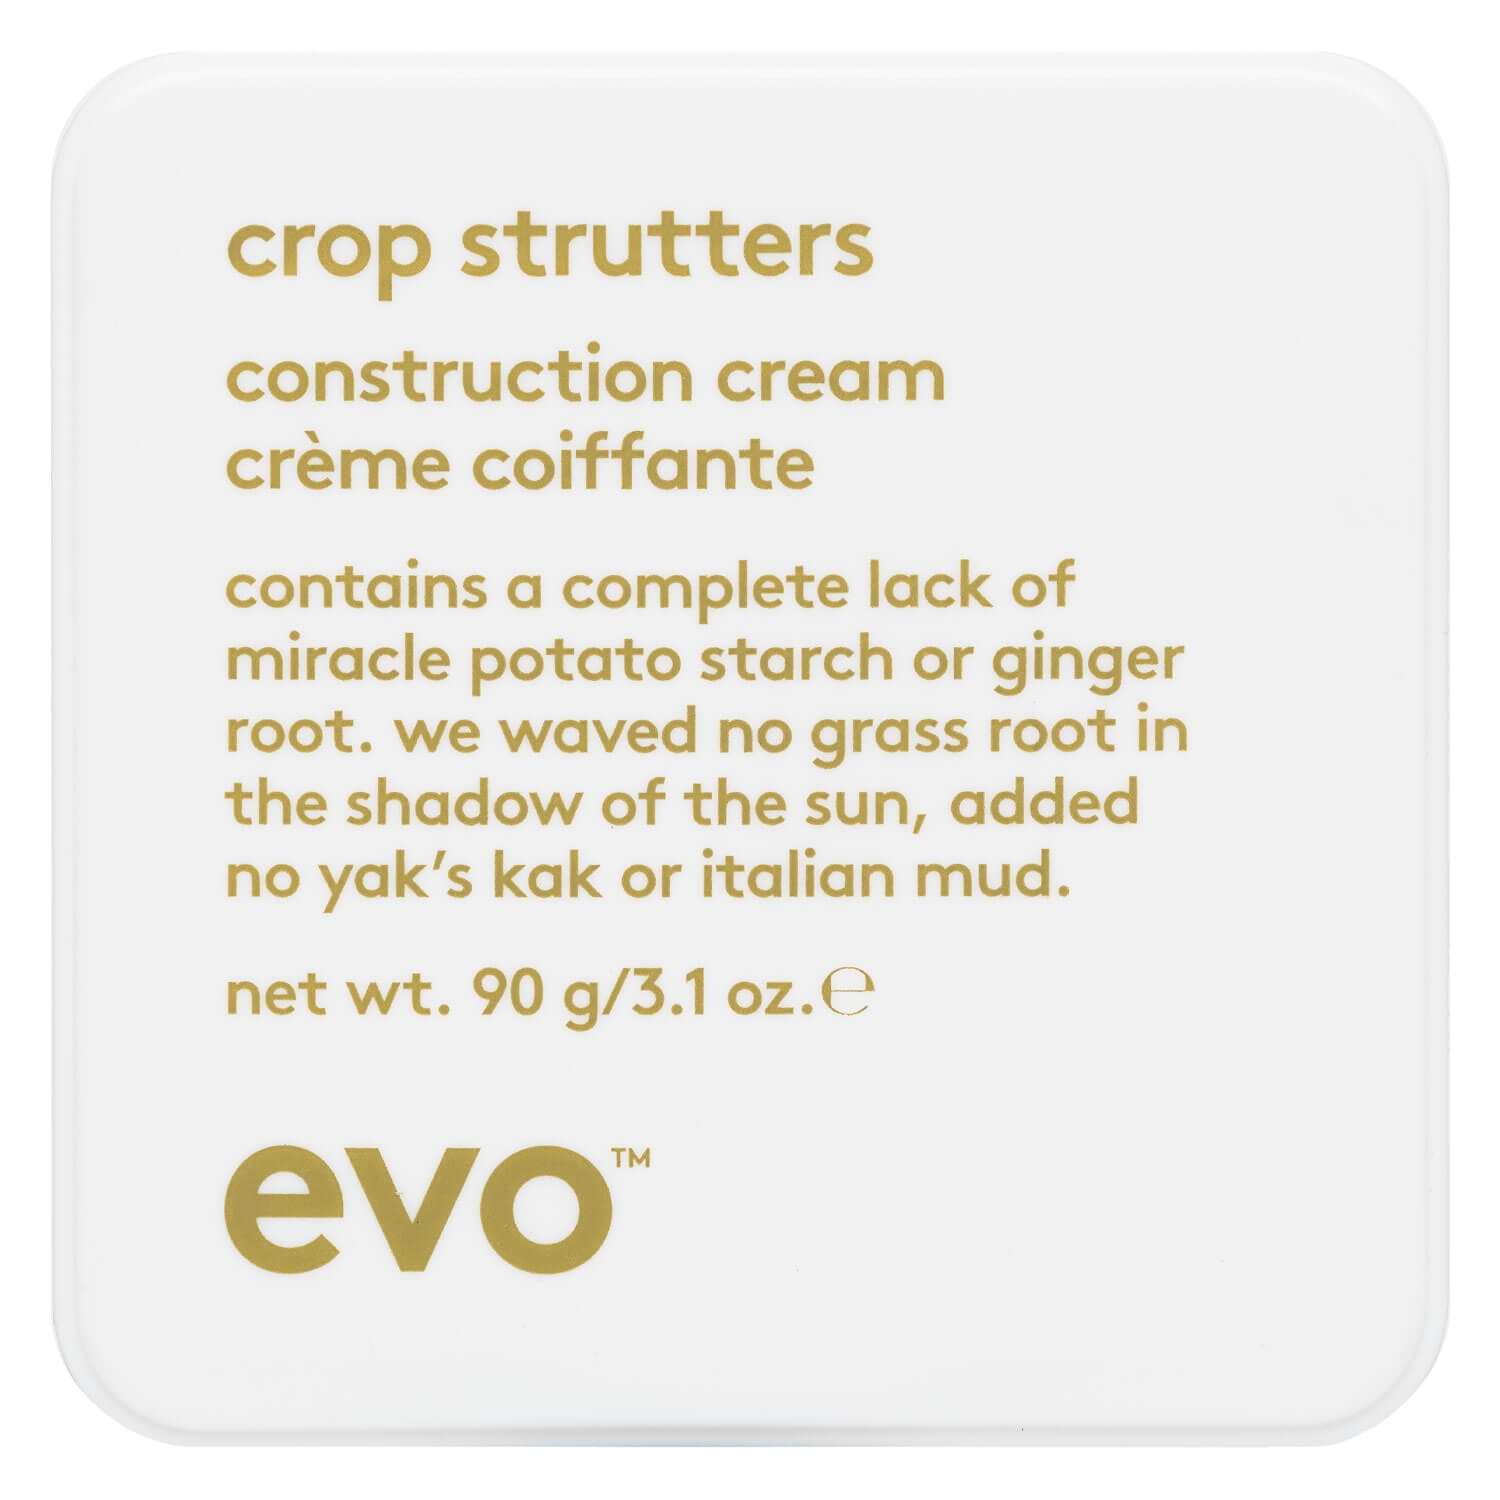 Product image from evo style - crop strutters construction cream